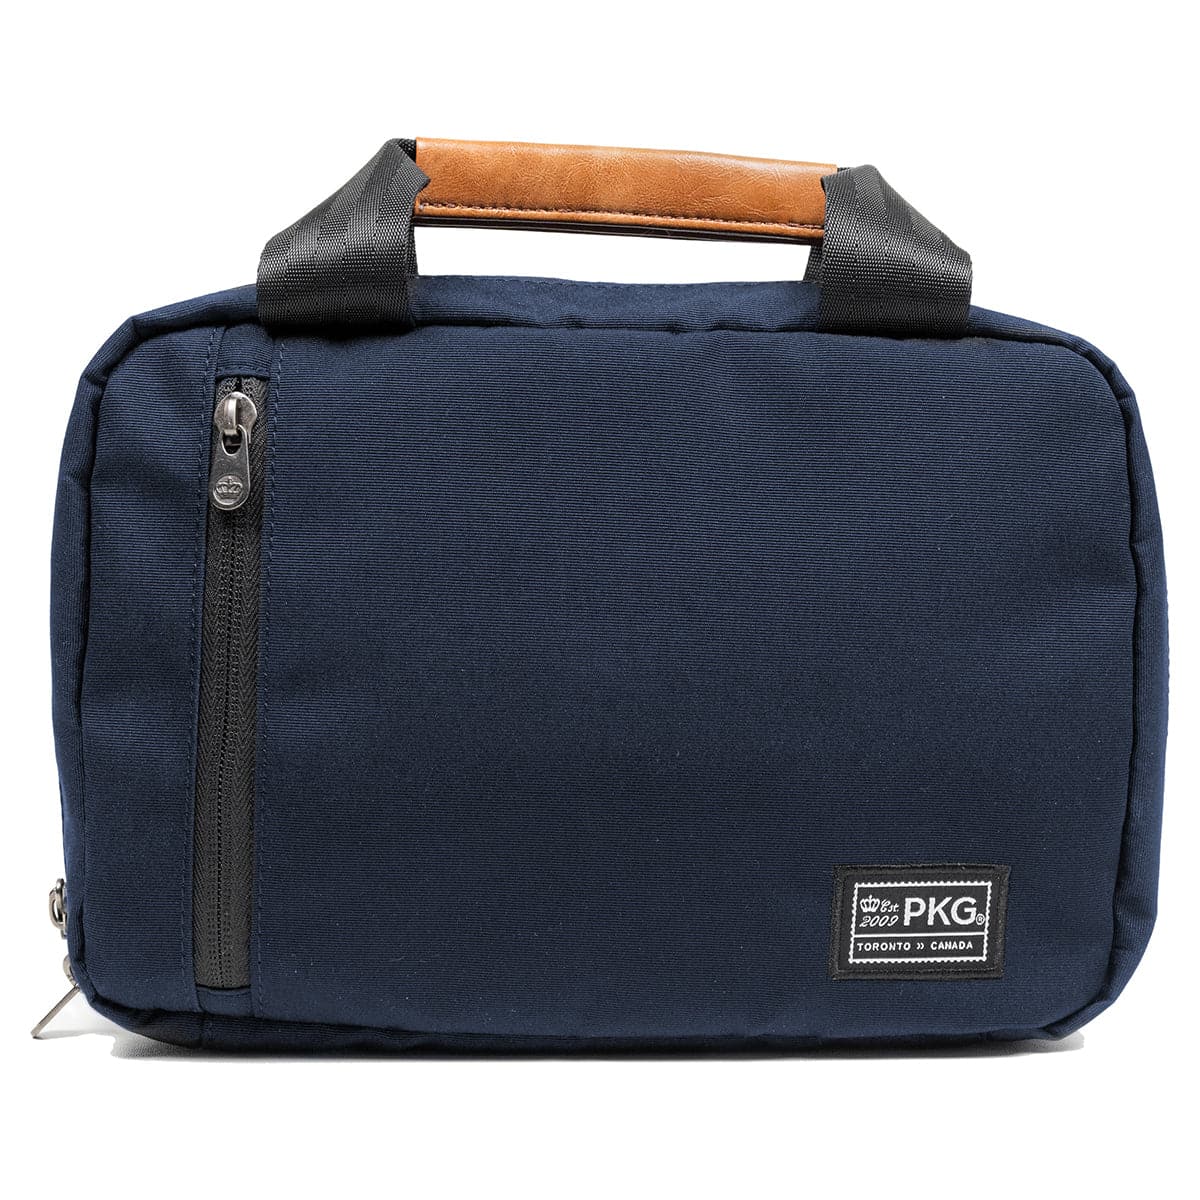 PKG Simcoe Recycled Toiletry Bag